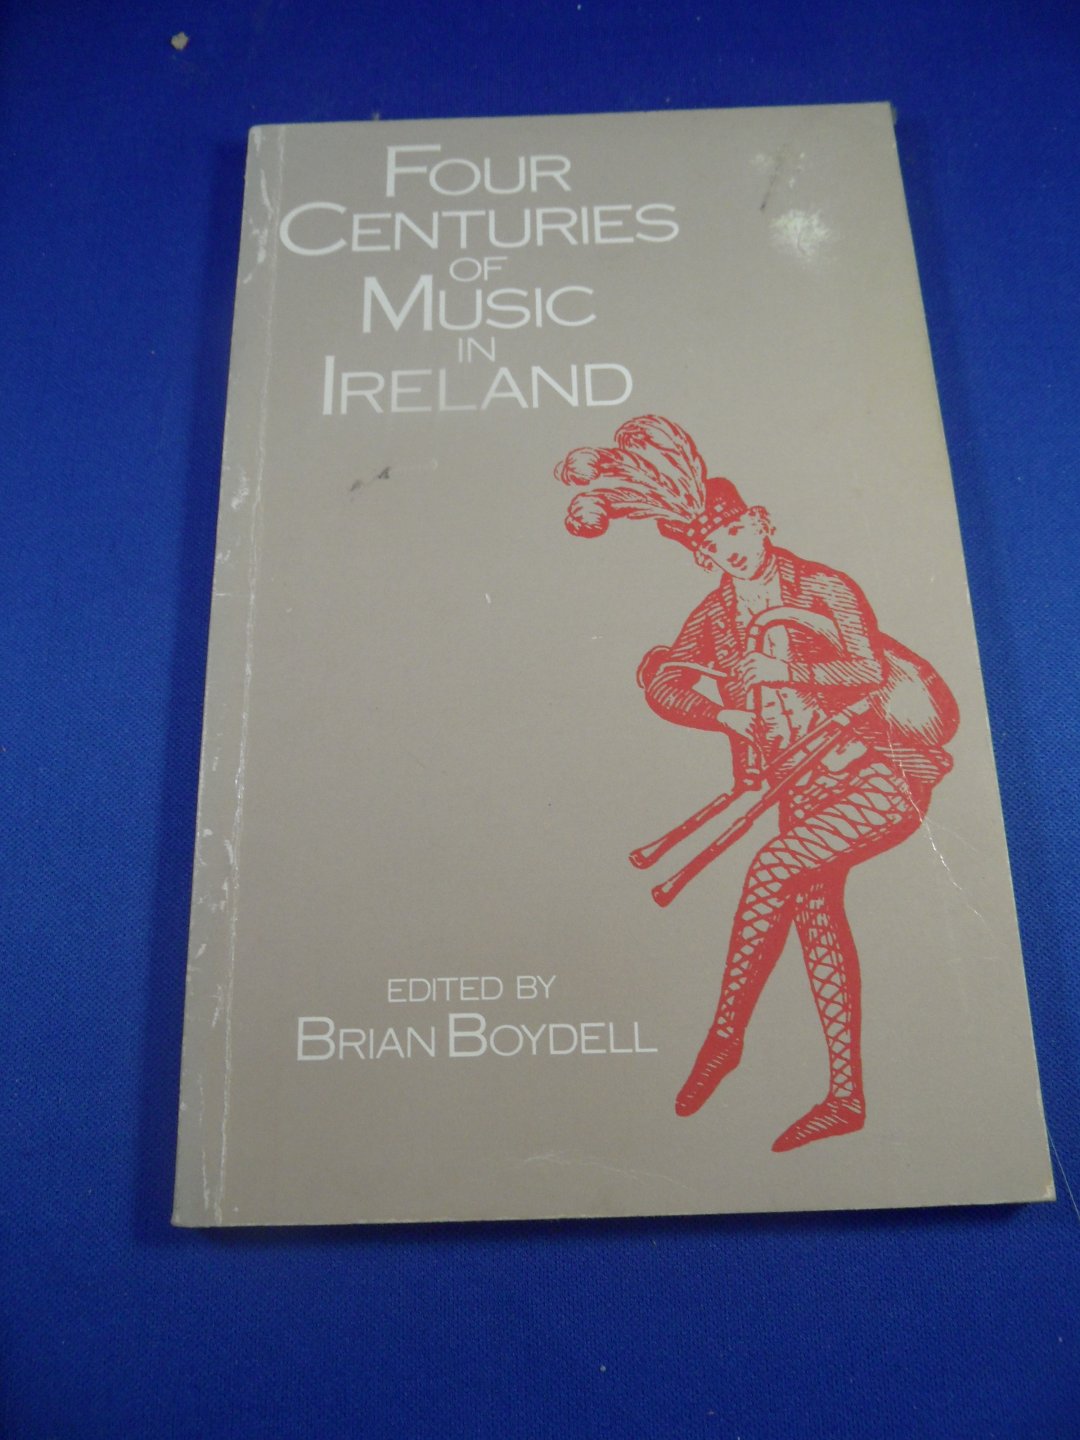 Boydell, Brian (ed) - four centuries of music in Ireland